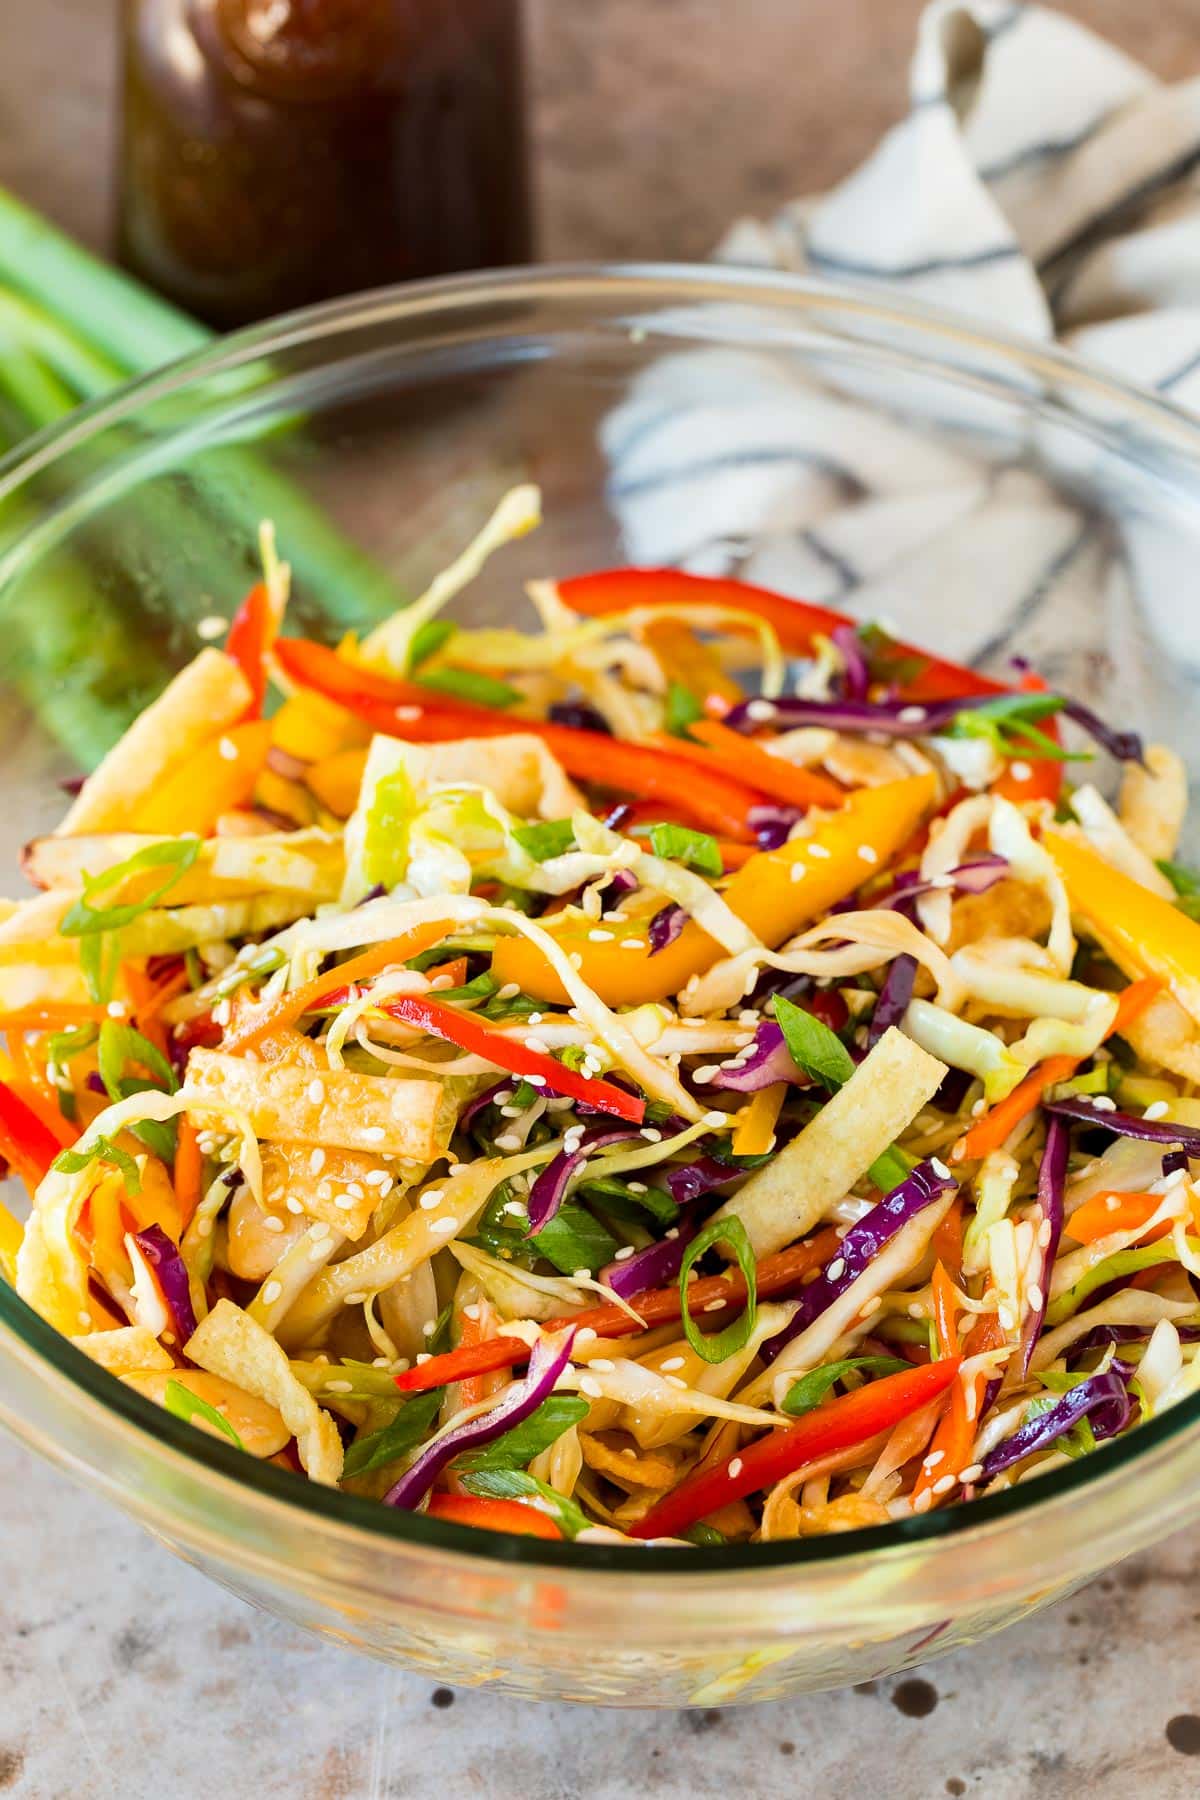 A salad with cabbage, peppers, wontons and Asian salad dressing.